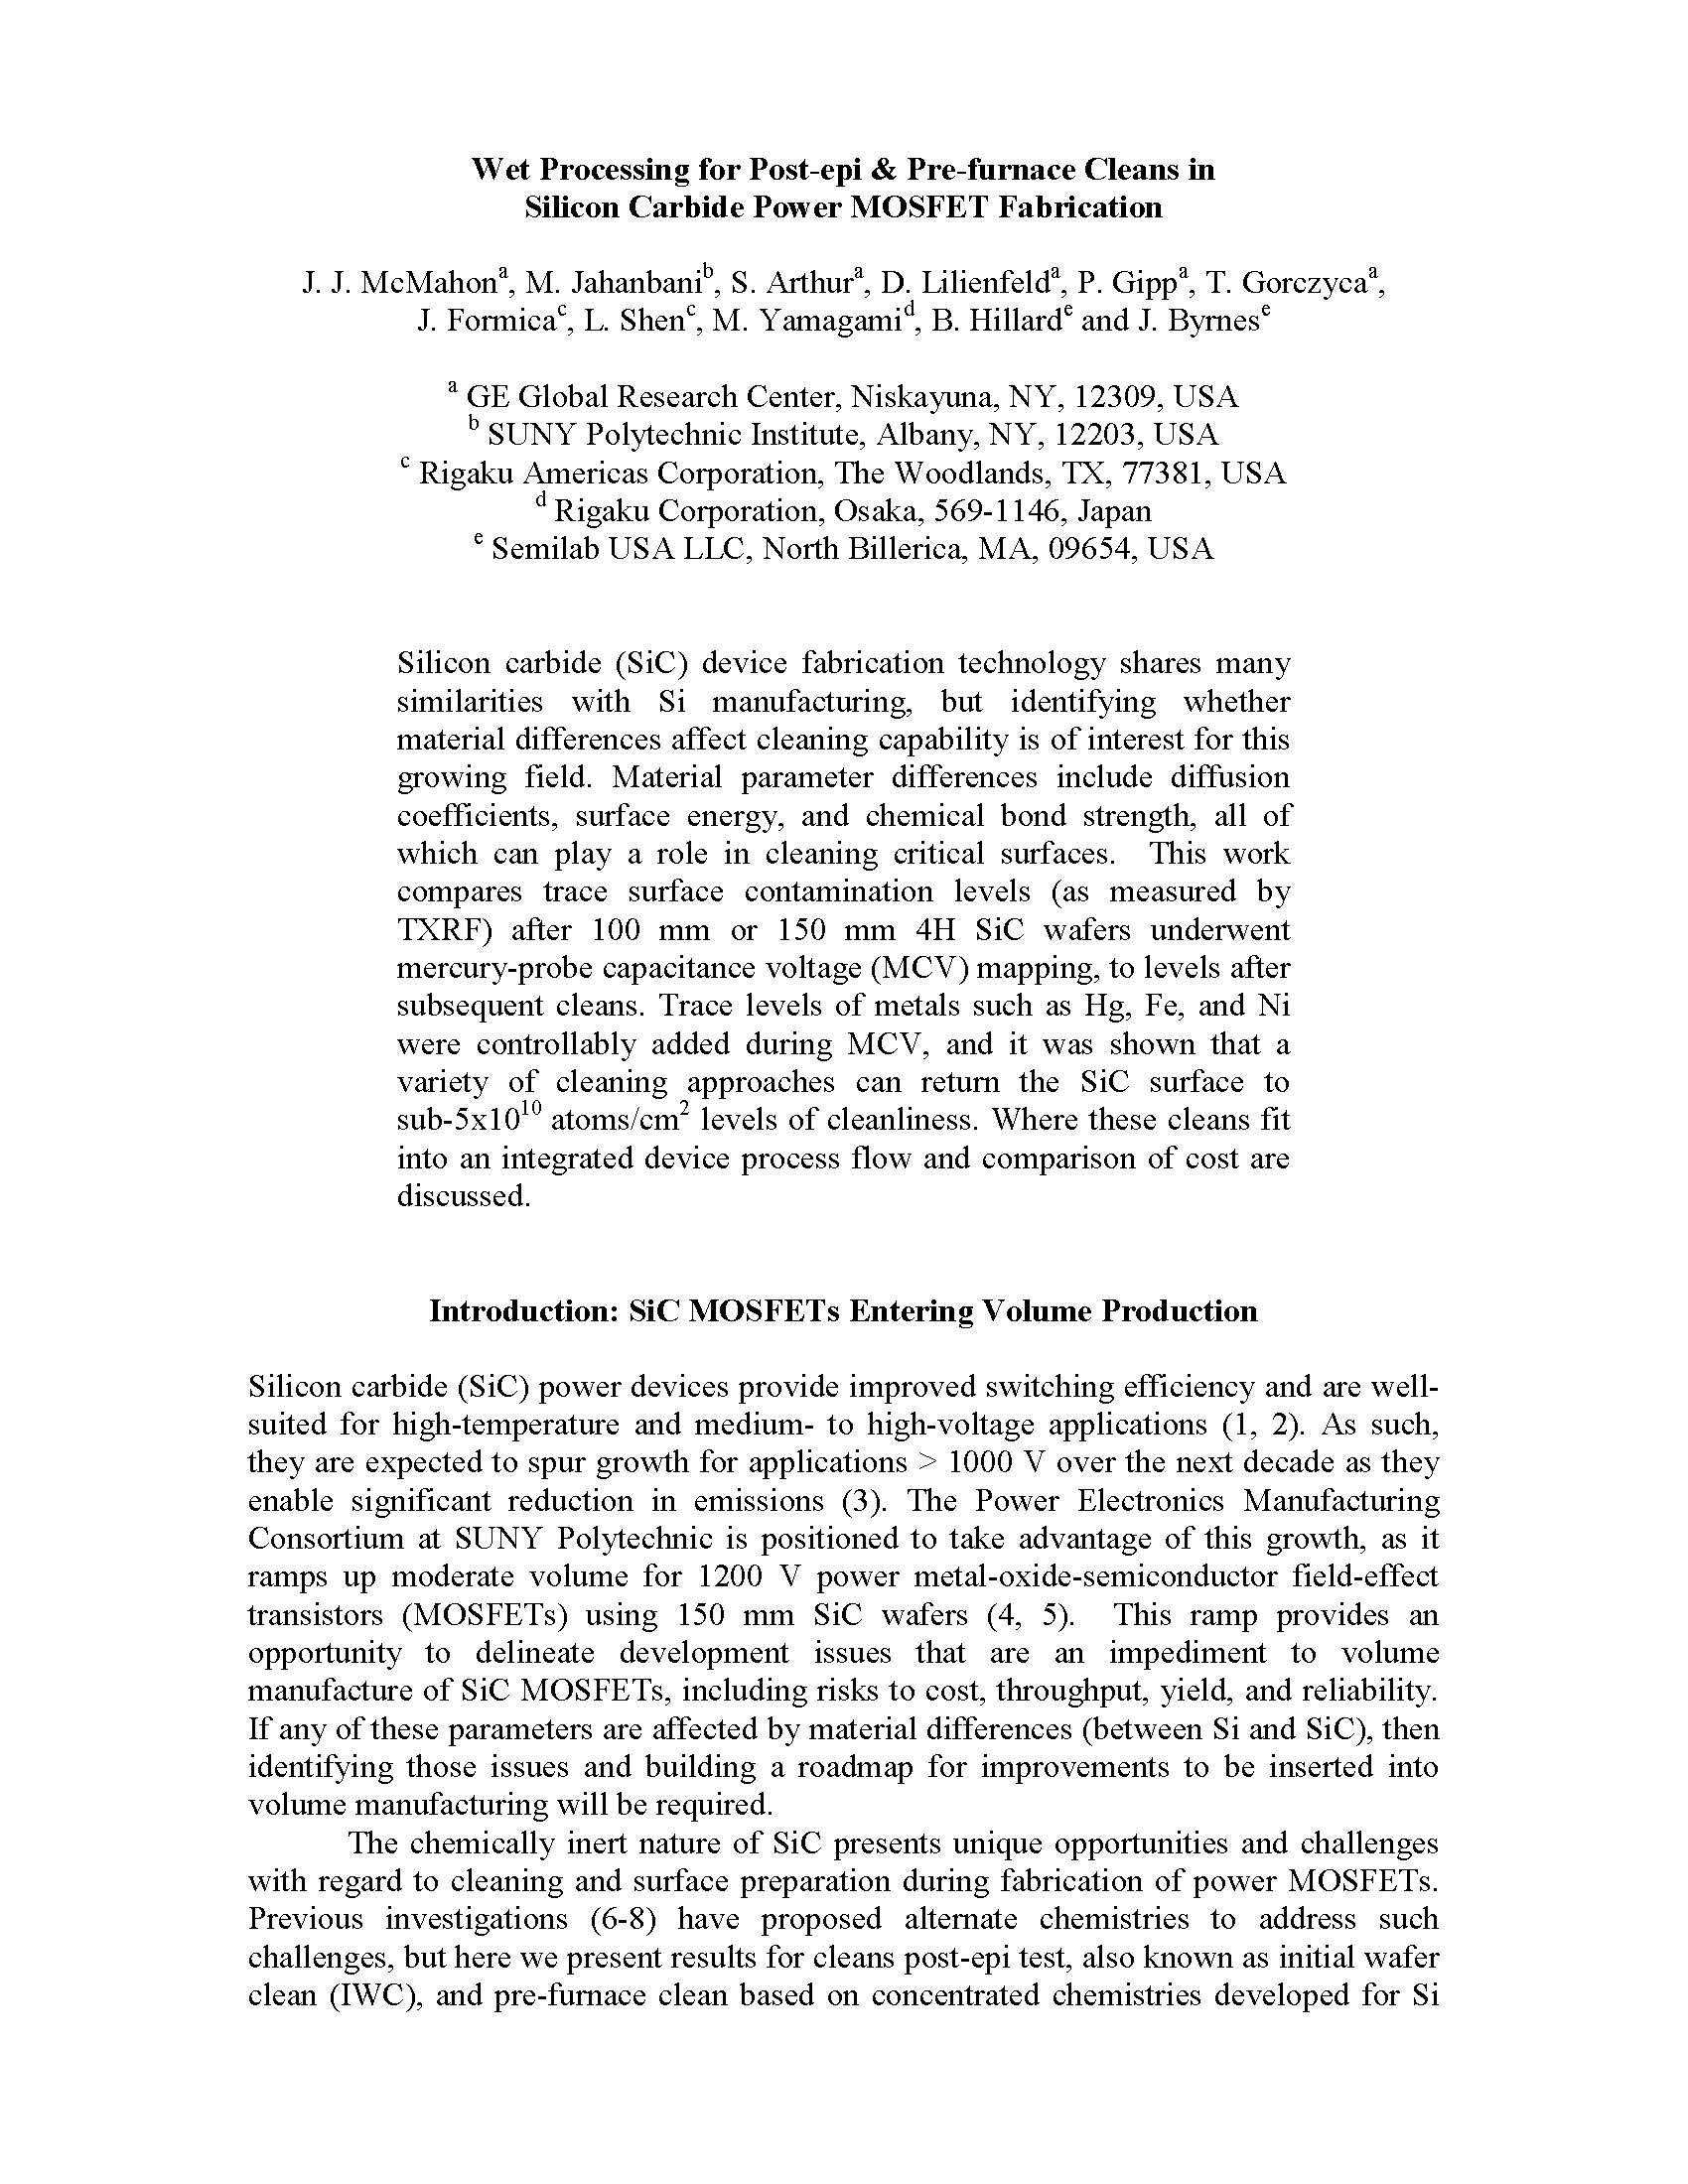 ECS 2015 Paper_58944_Cleans in SiC Power MOSFET Fabrication-1